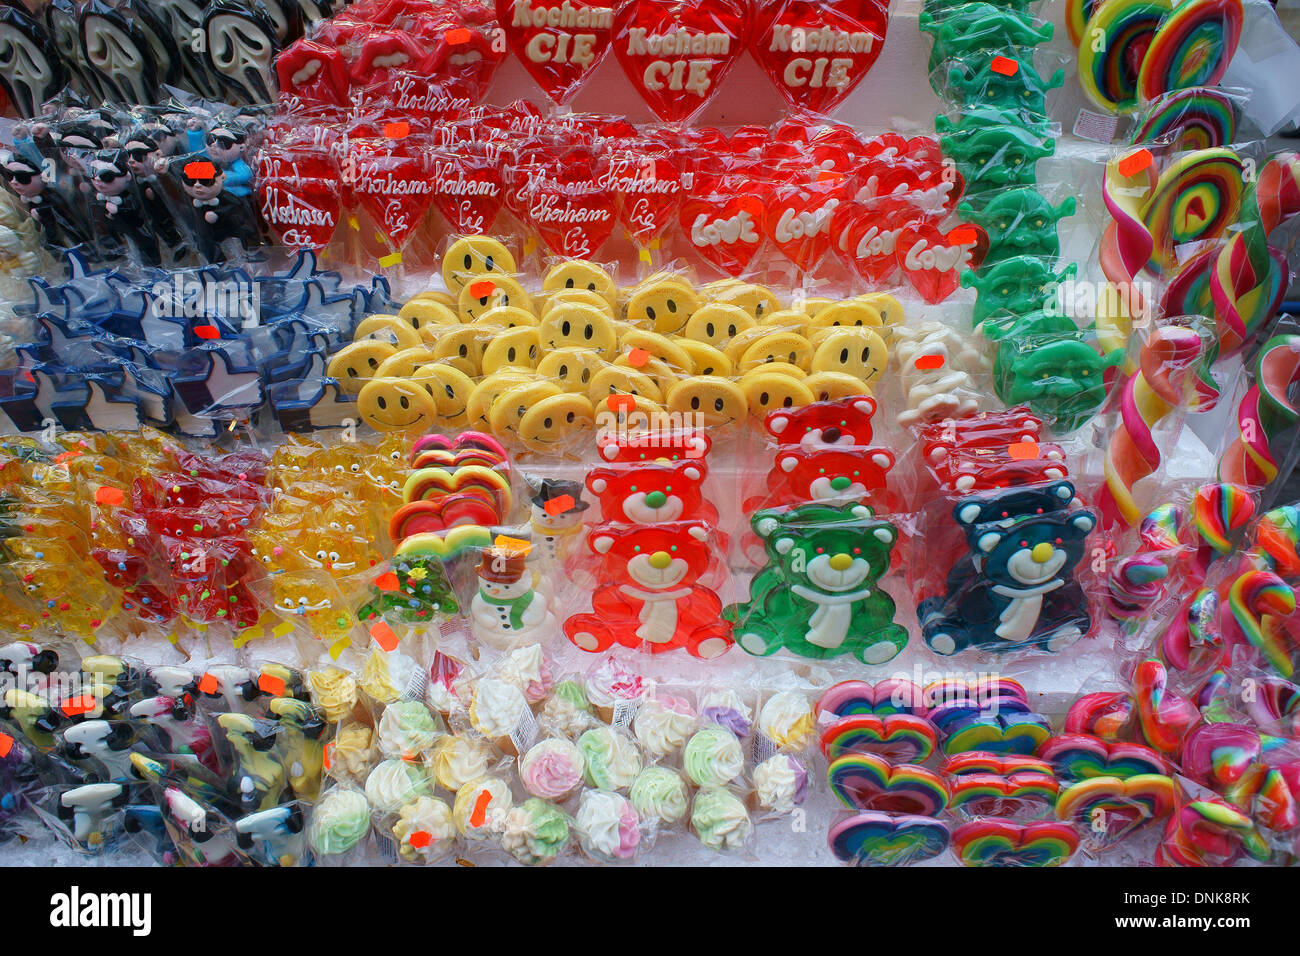 Plenty of colorful lollipops displayed for sale Stock Photo